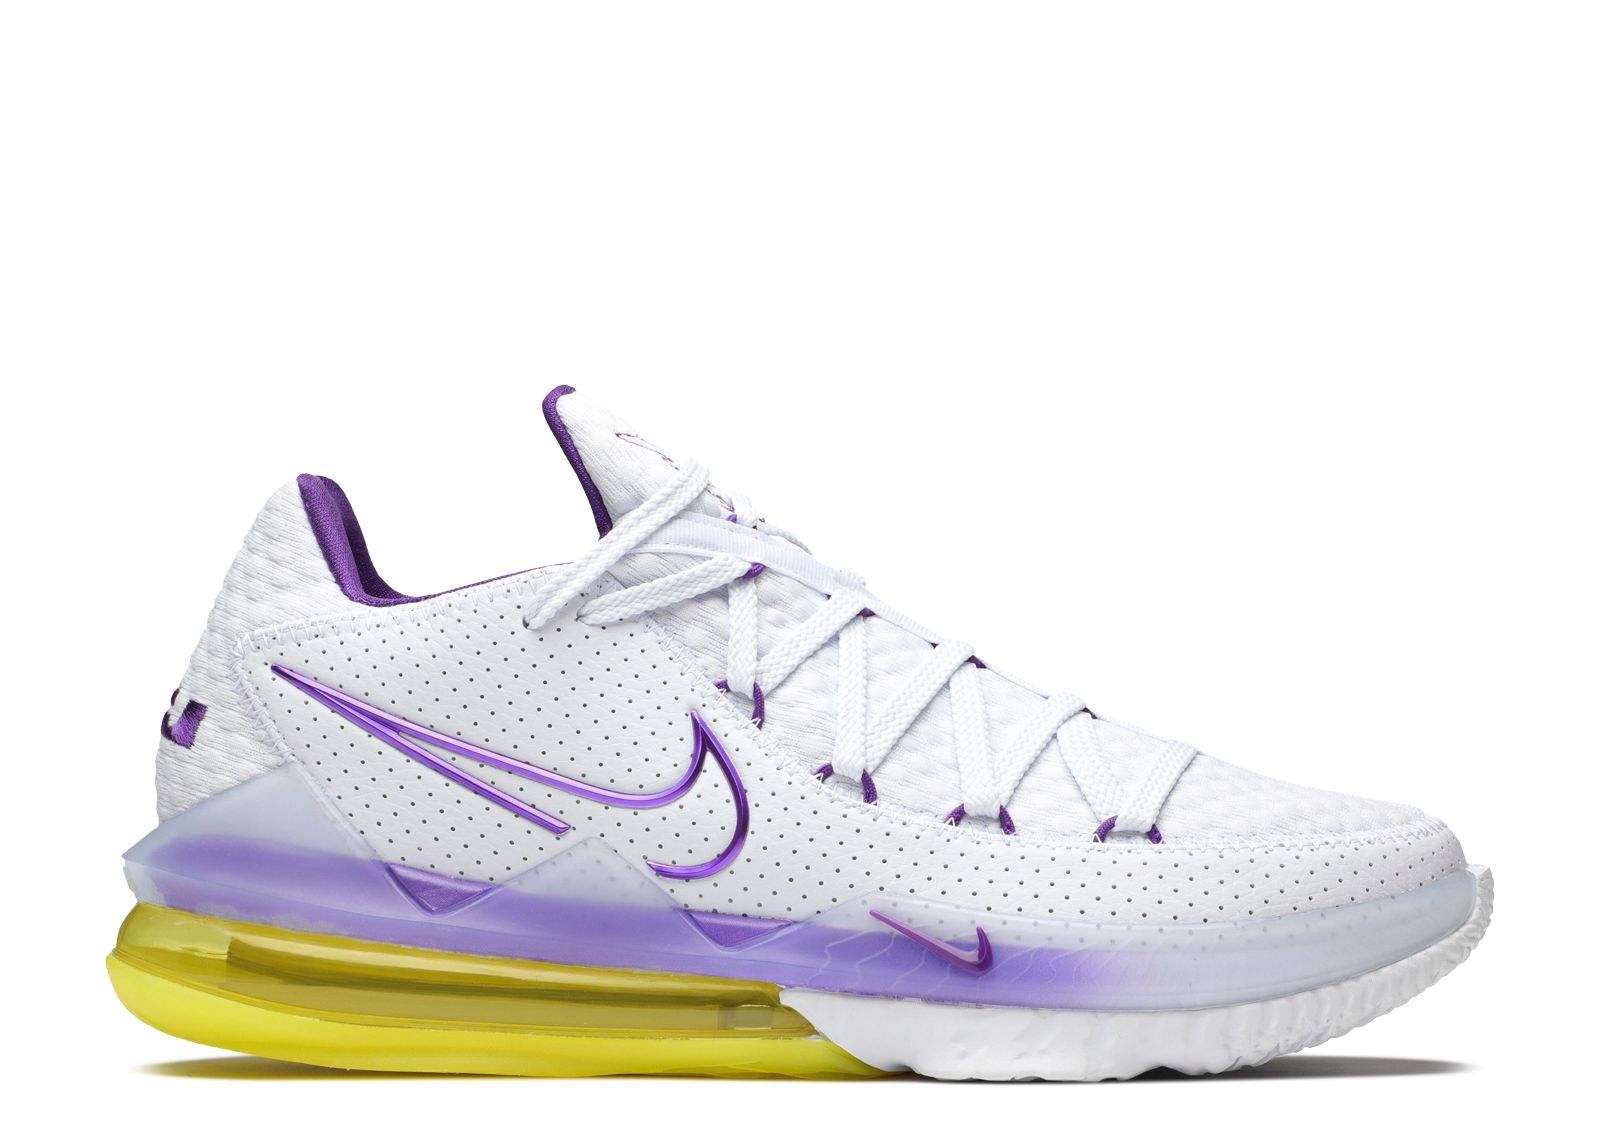 Nike LeBron 17 'Lakers' Release Date - Finish Line